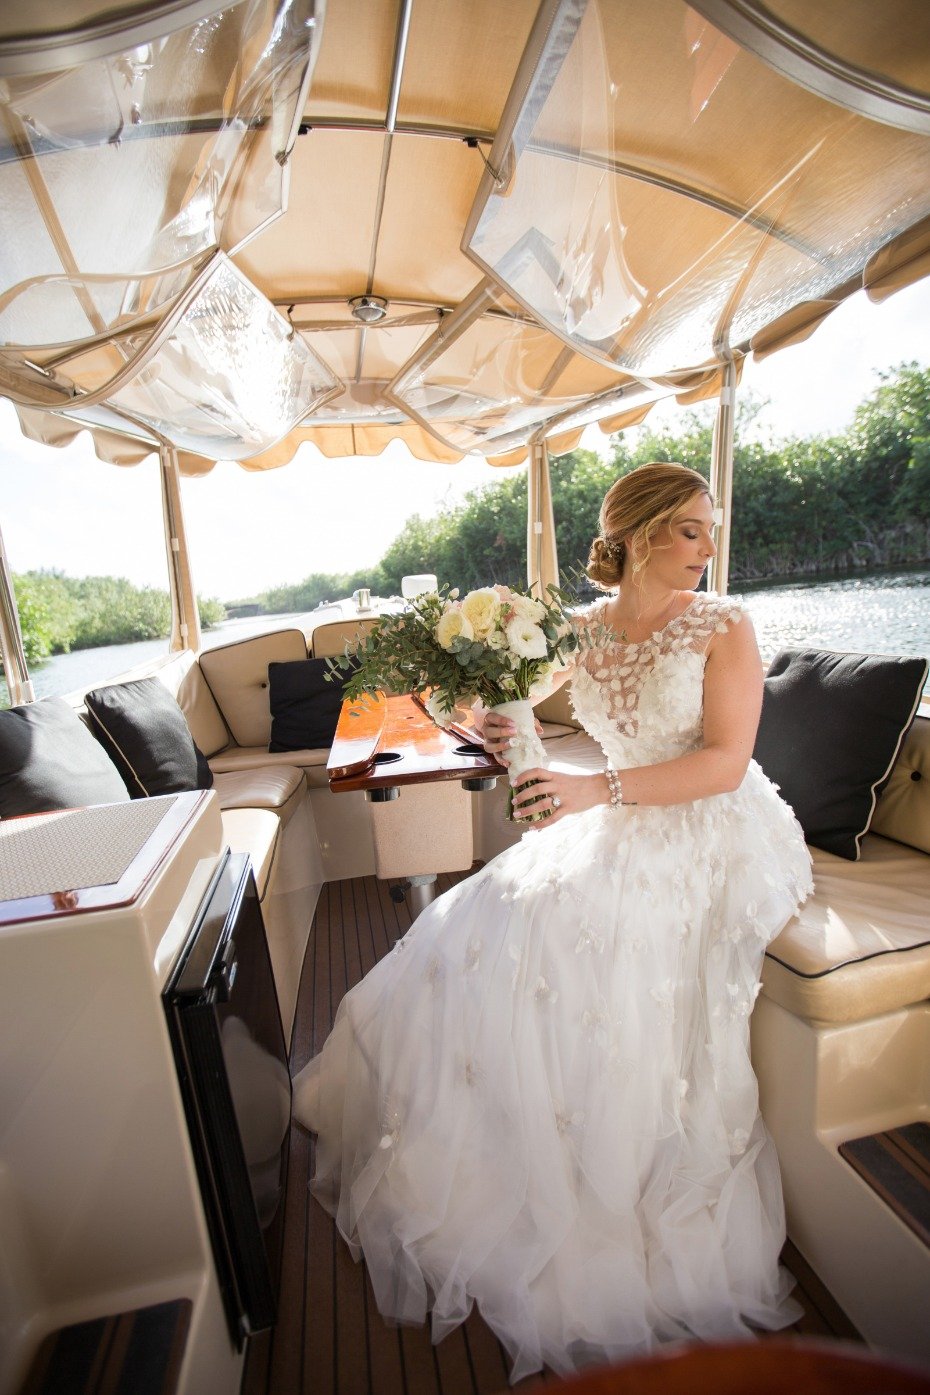 Boat ride for the bride